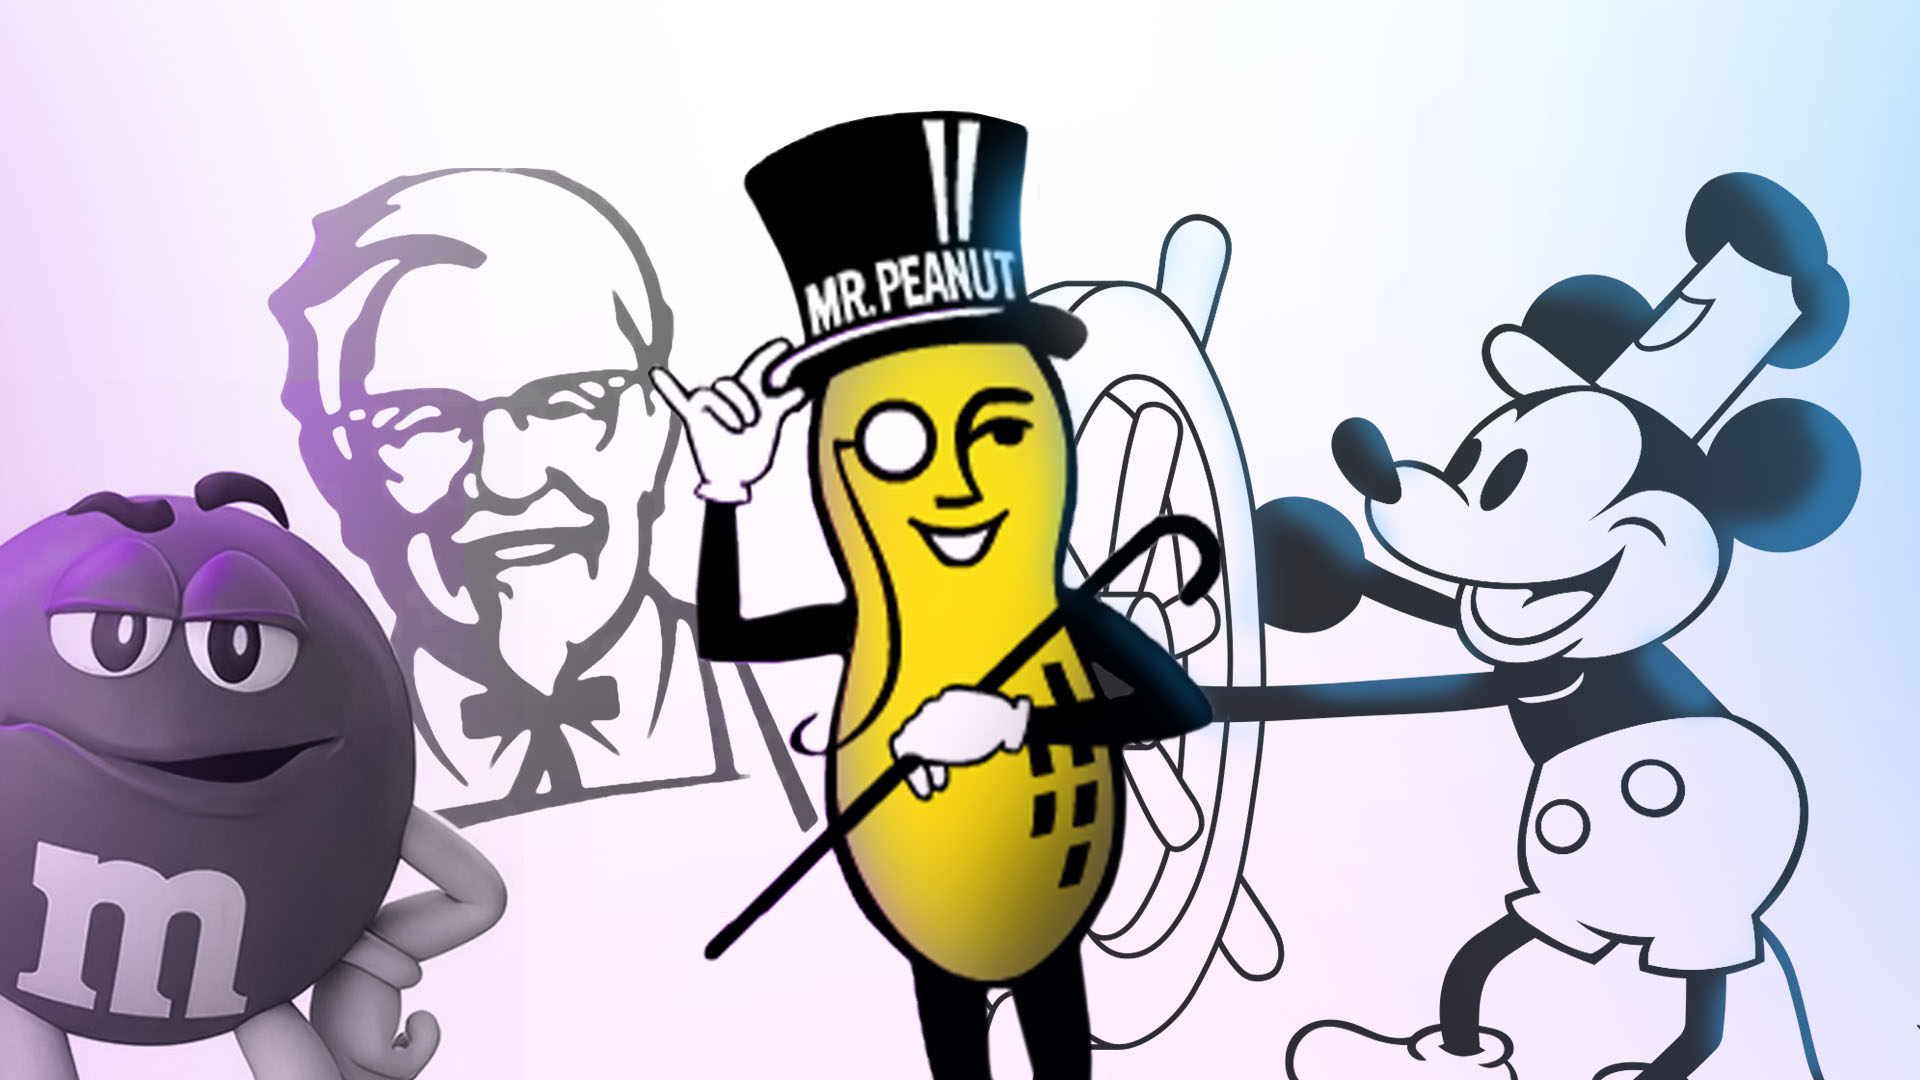 35 Most Famous And Popular Brand Mascots